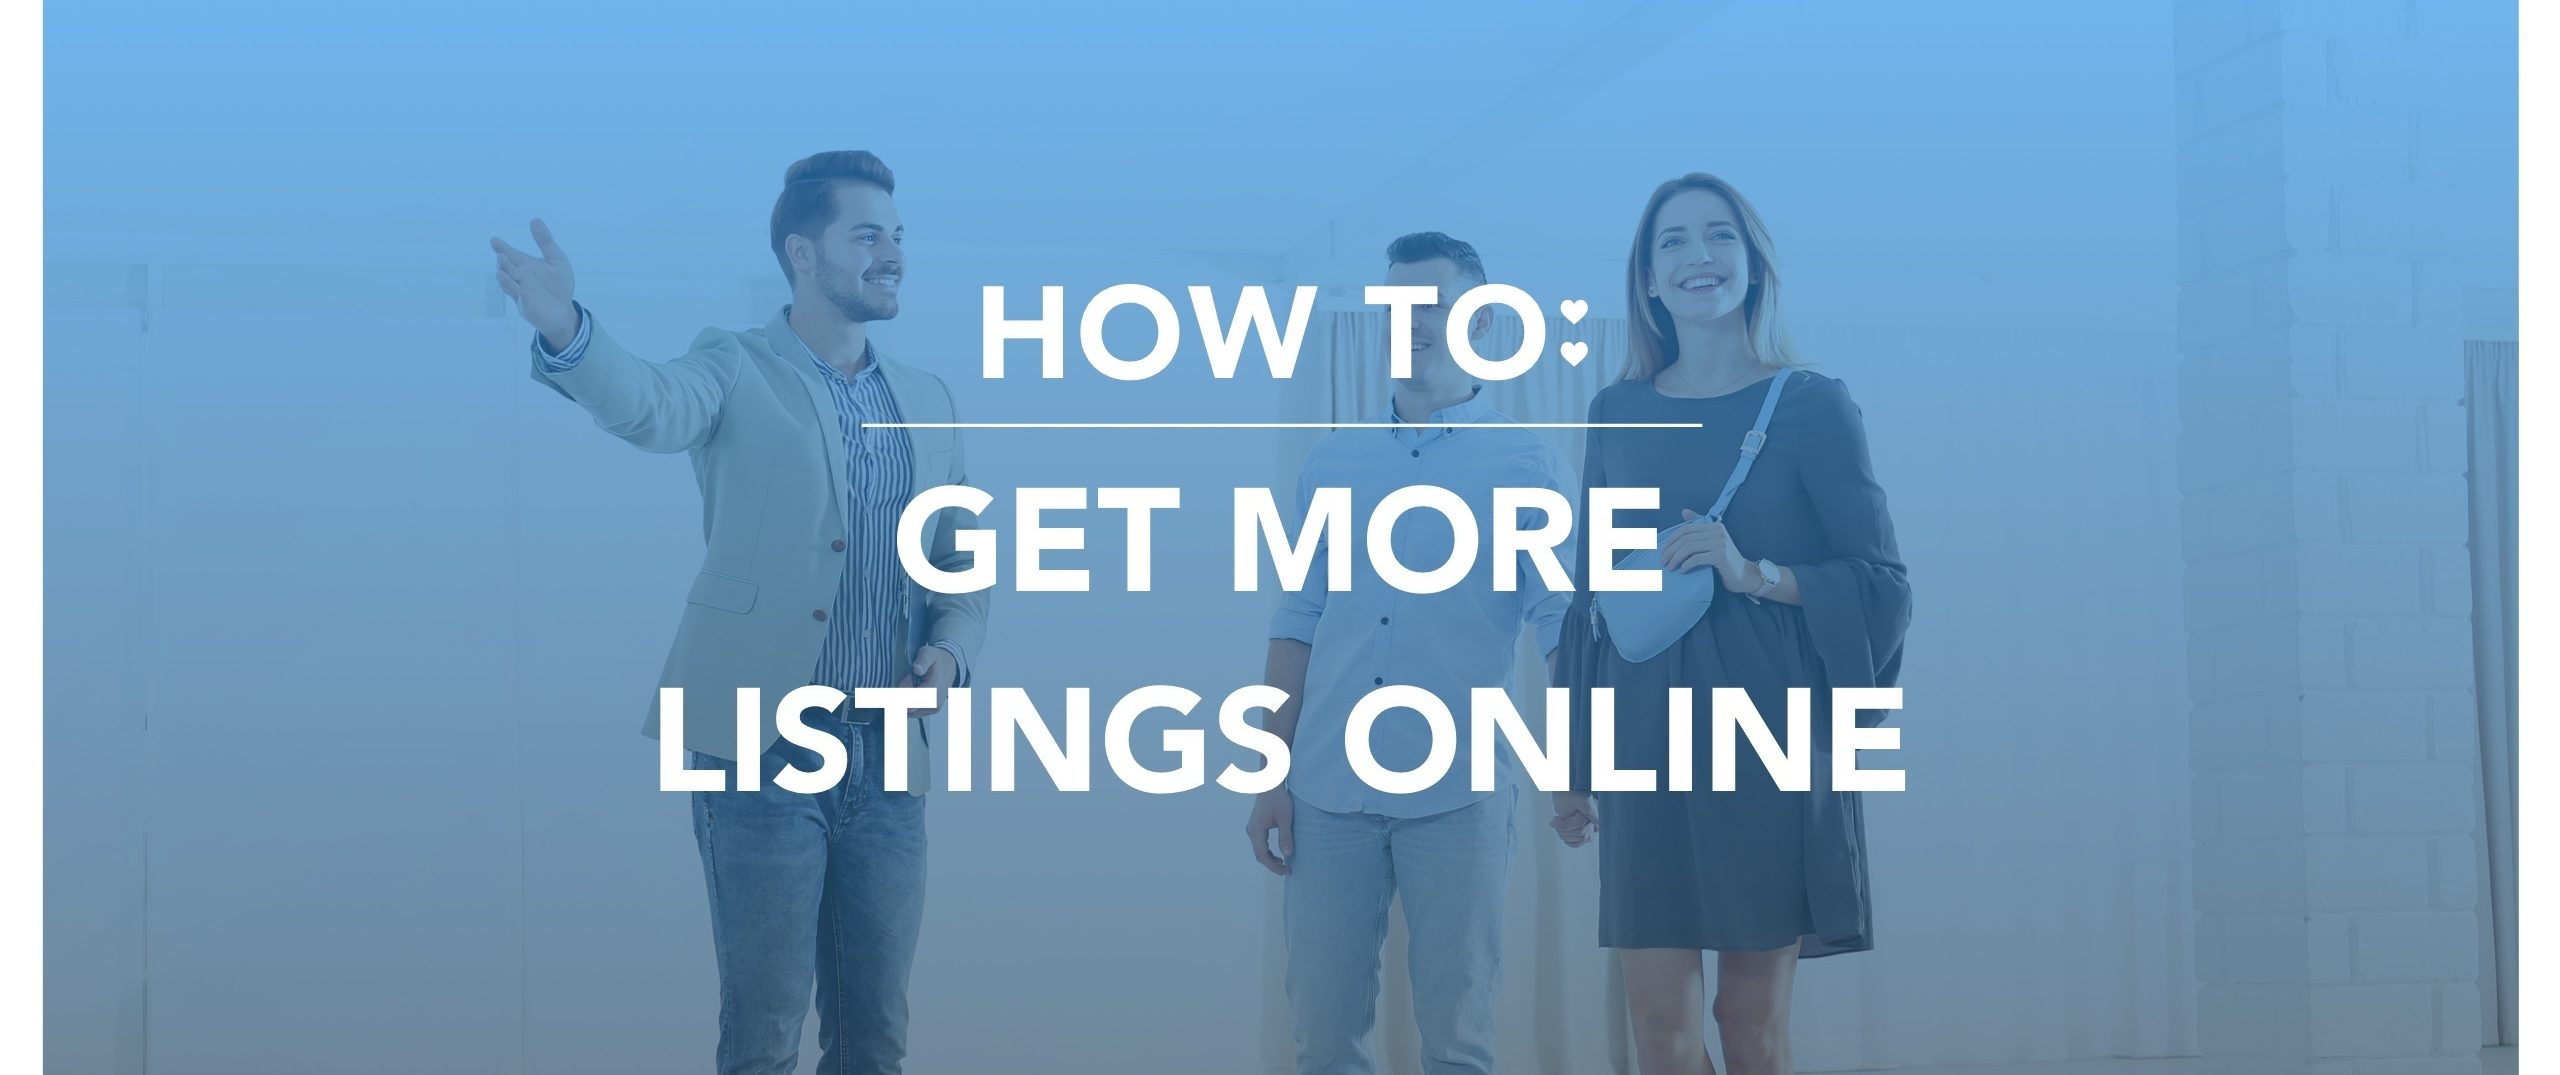 How to Get More Listings Online